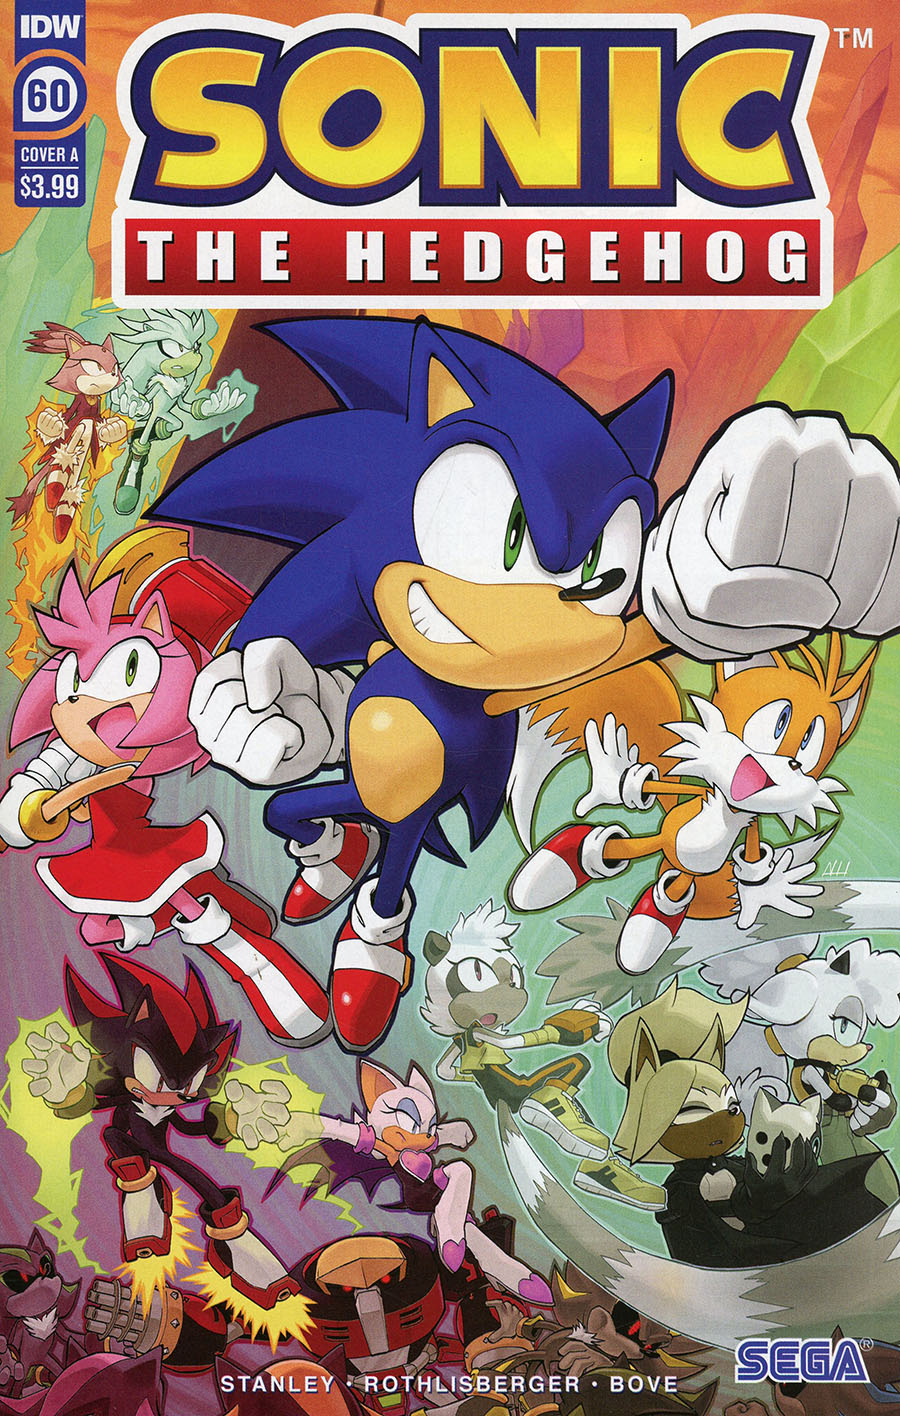 Sonic The Hedgehog Vol 3 #60 Cover A Regular Aaron Hammerstrom Cover